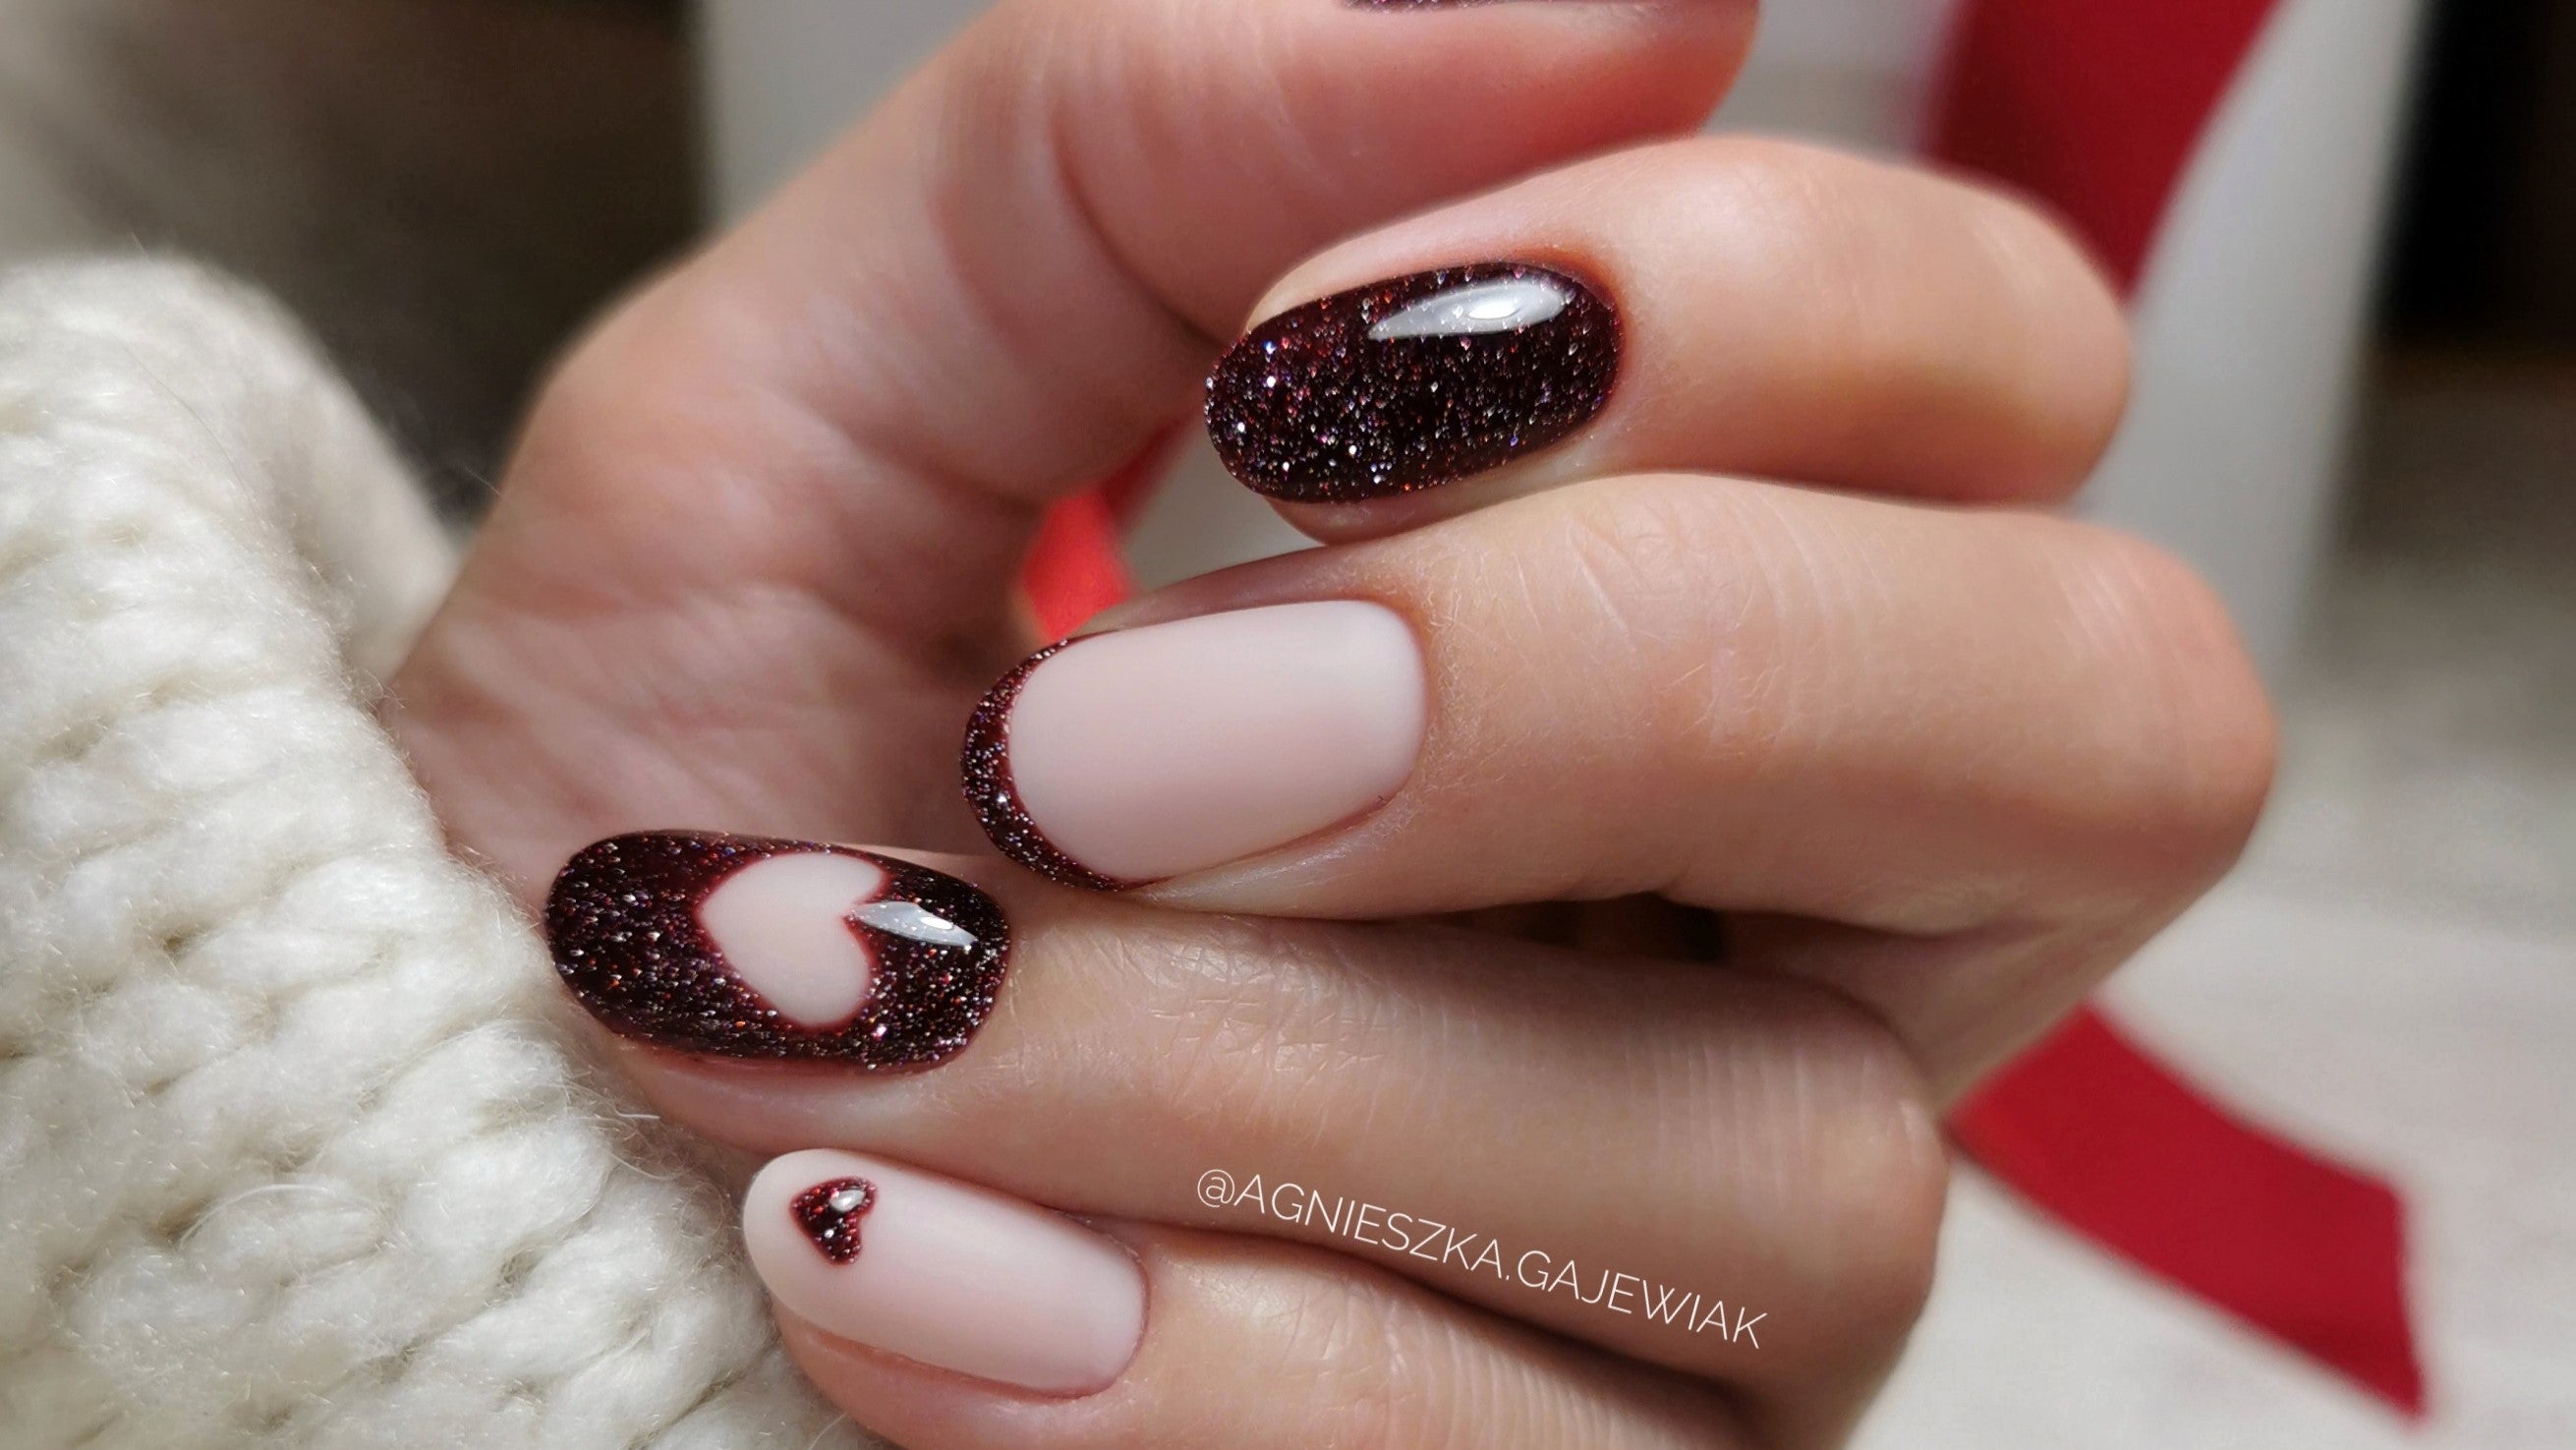 Heart Manicure: A Cute and Playful Manicure for Valentine's Day